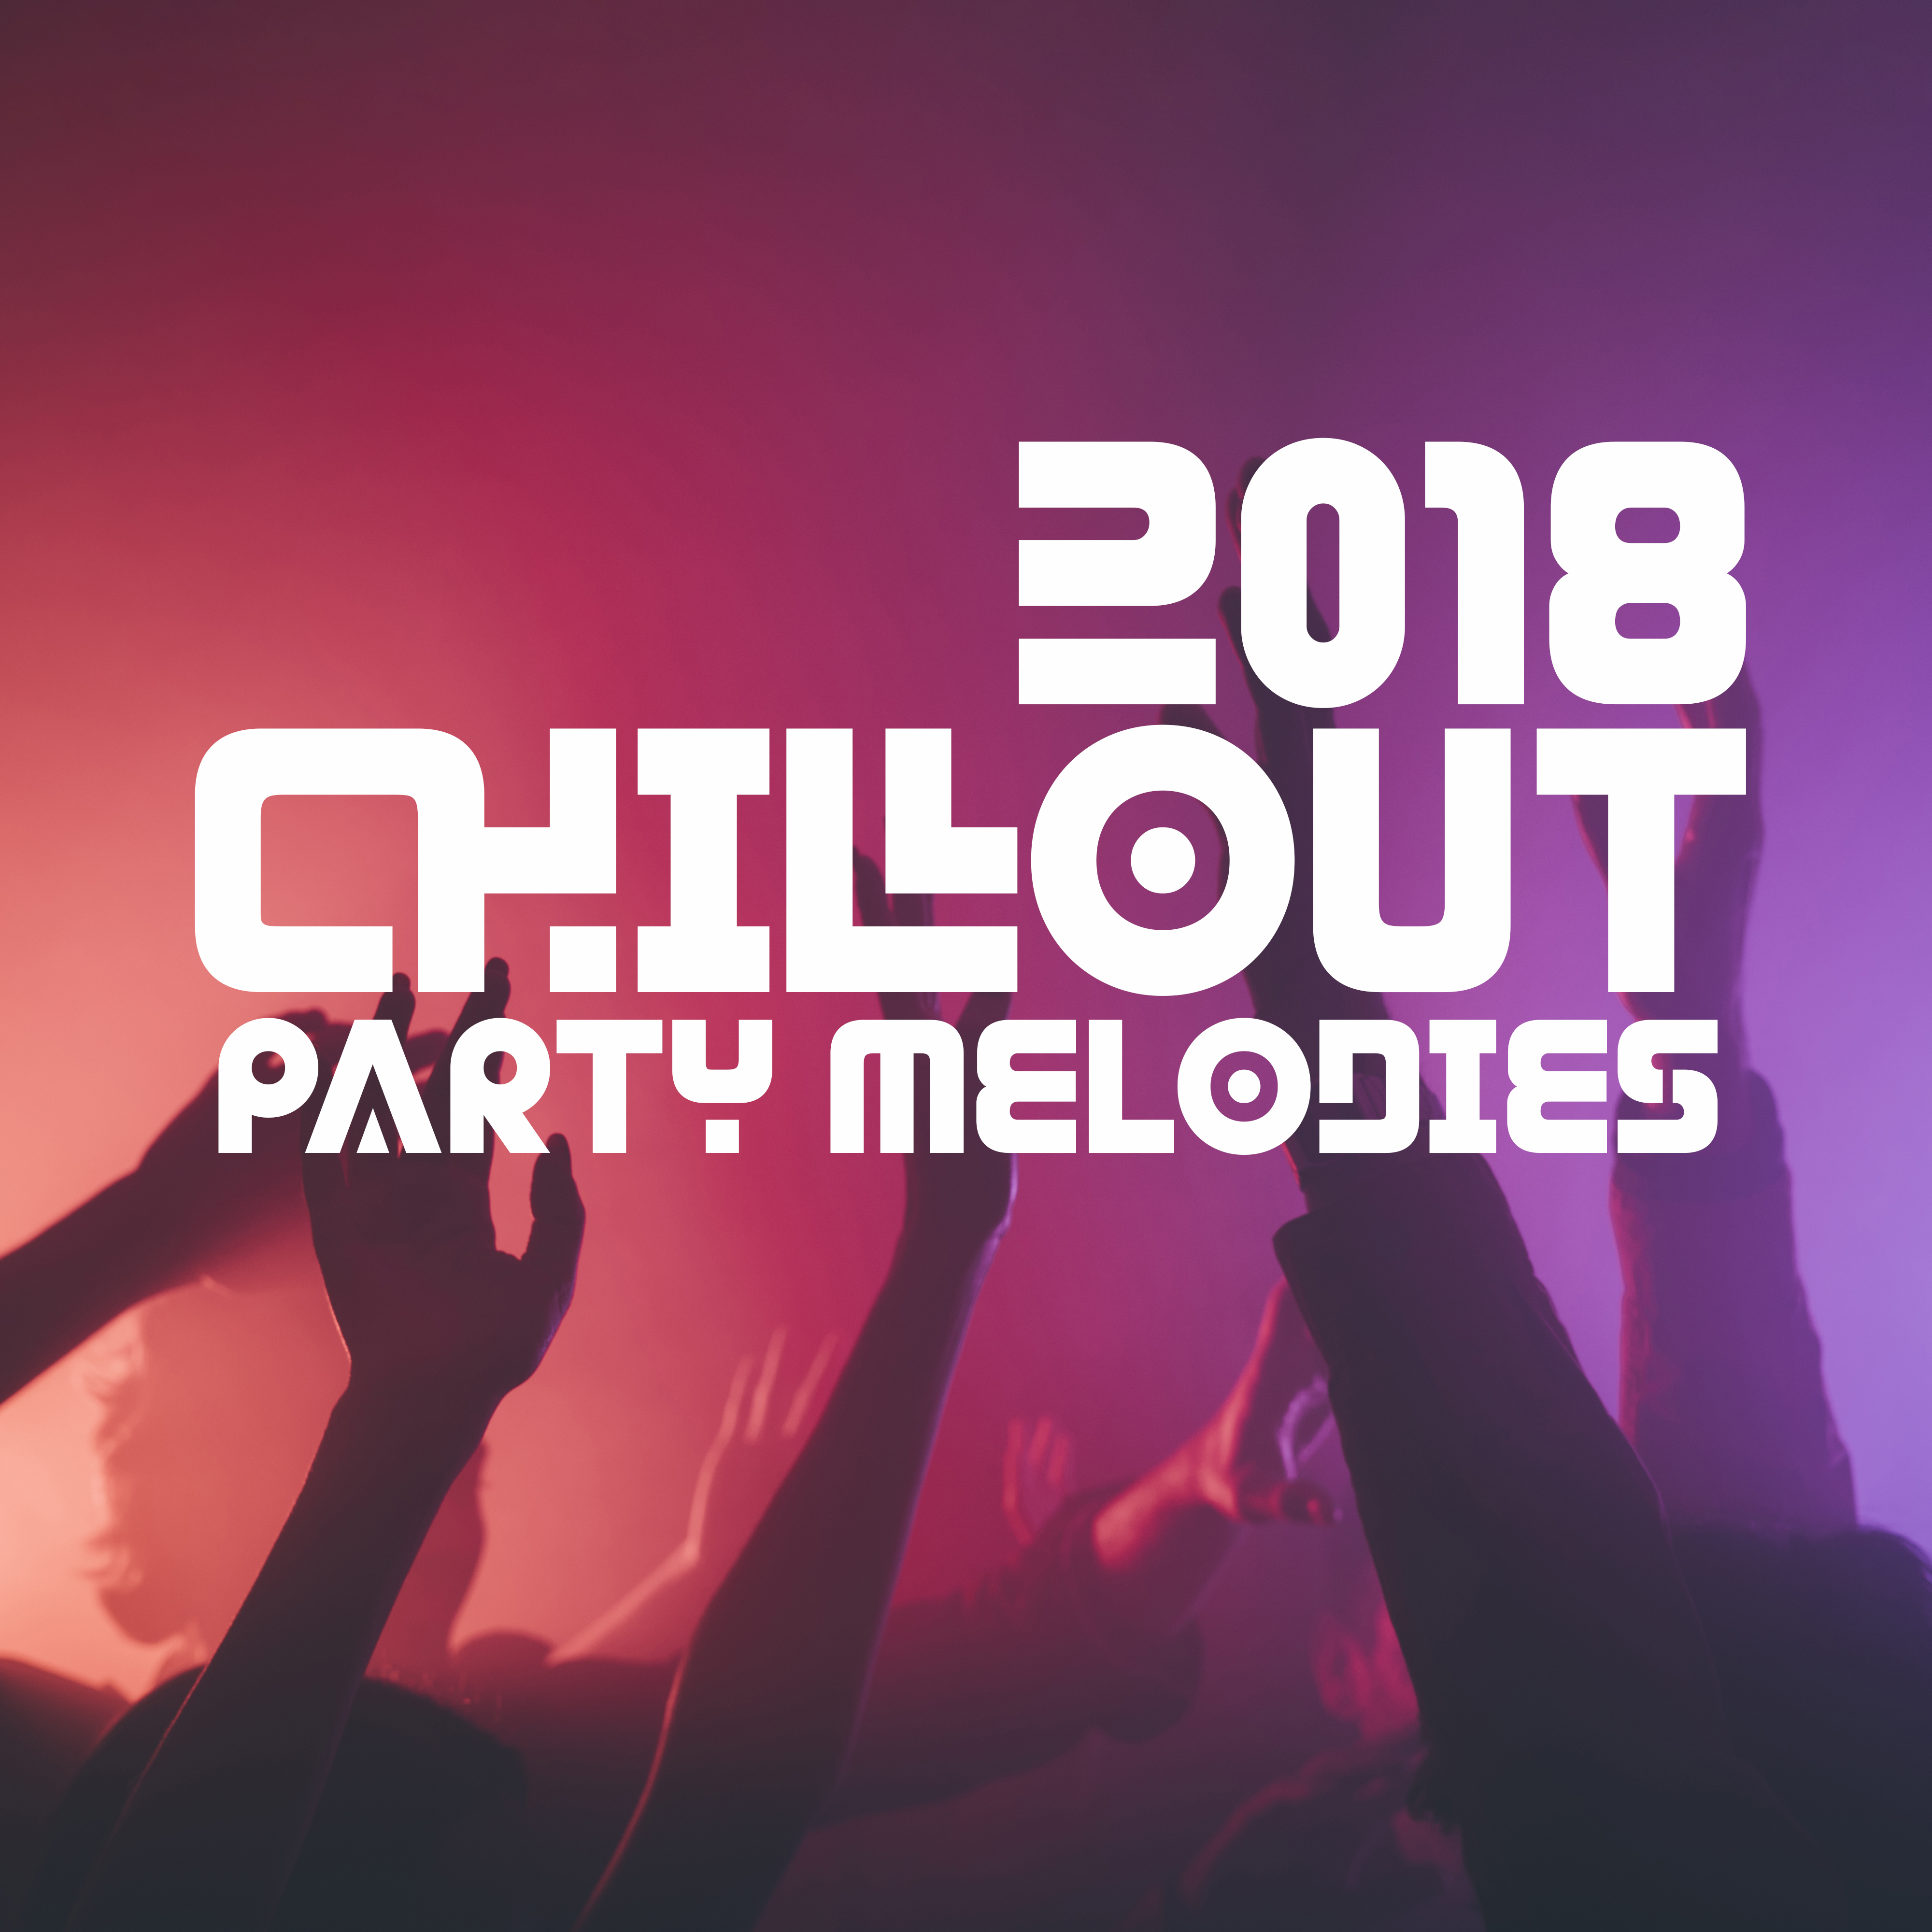 Chillout Party Melodies 2018